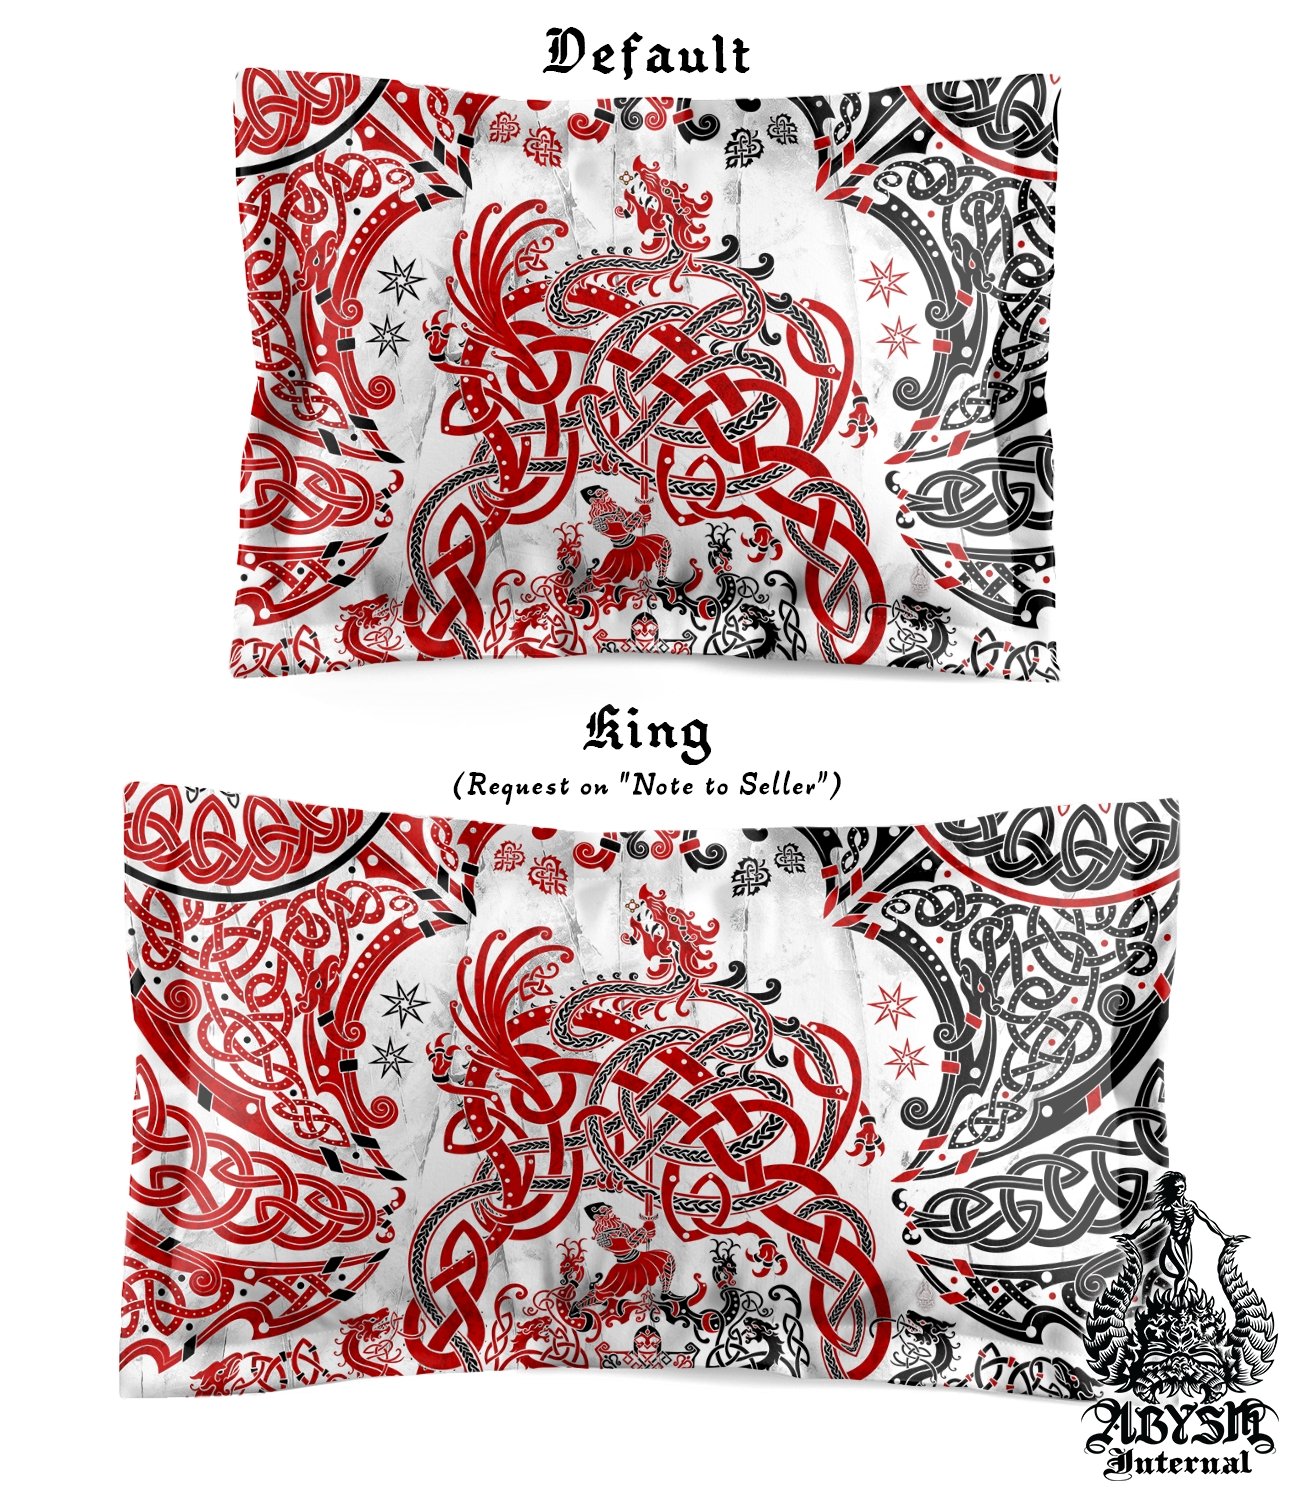 Viking Bedding Set, Comforter and Duvet, Norse Bed Cover and Bedroom Decor, Nordic Art, Sigurd kills Dragon Fafnir, King, Queen and Twin Size - Bloody White Goth - Abysm Internal